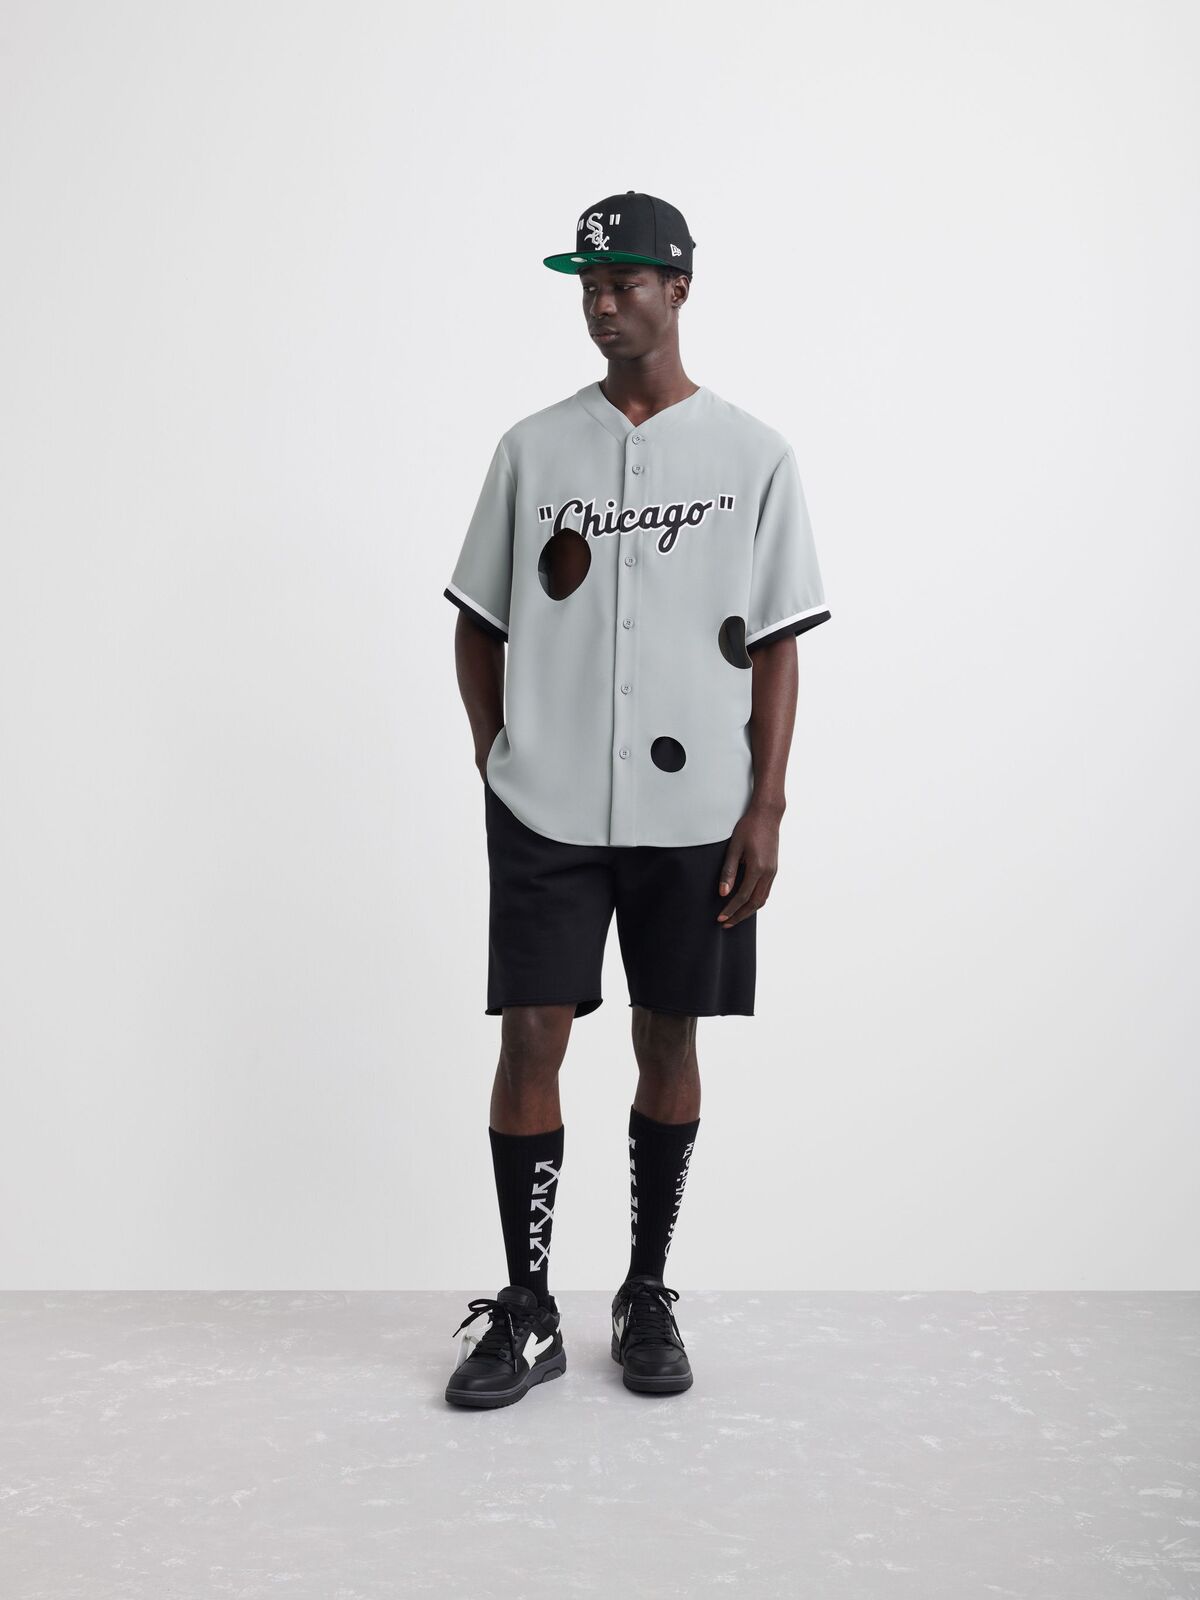 Dodgers Jersey & More Part Of Collaboration Between Off-White, MLB